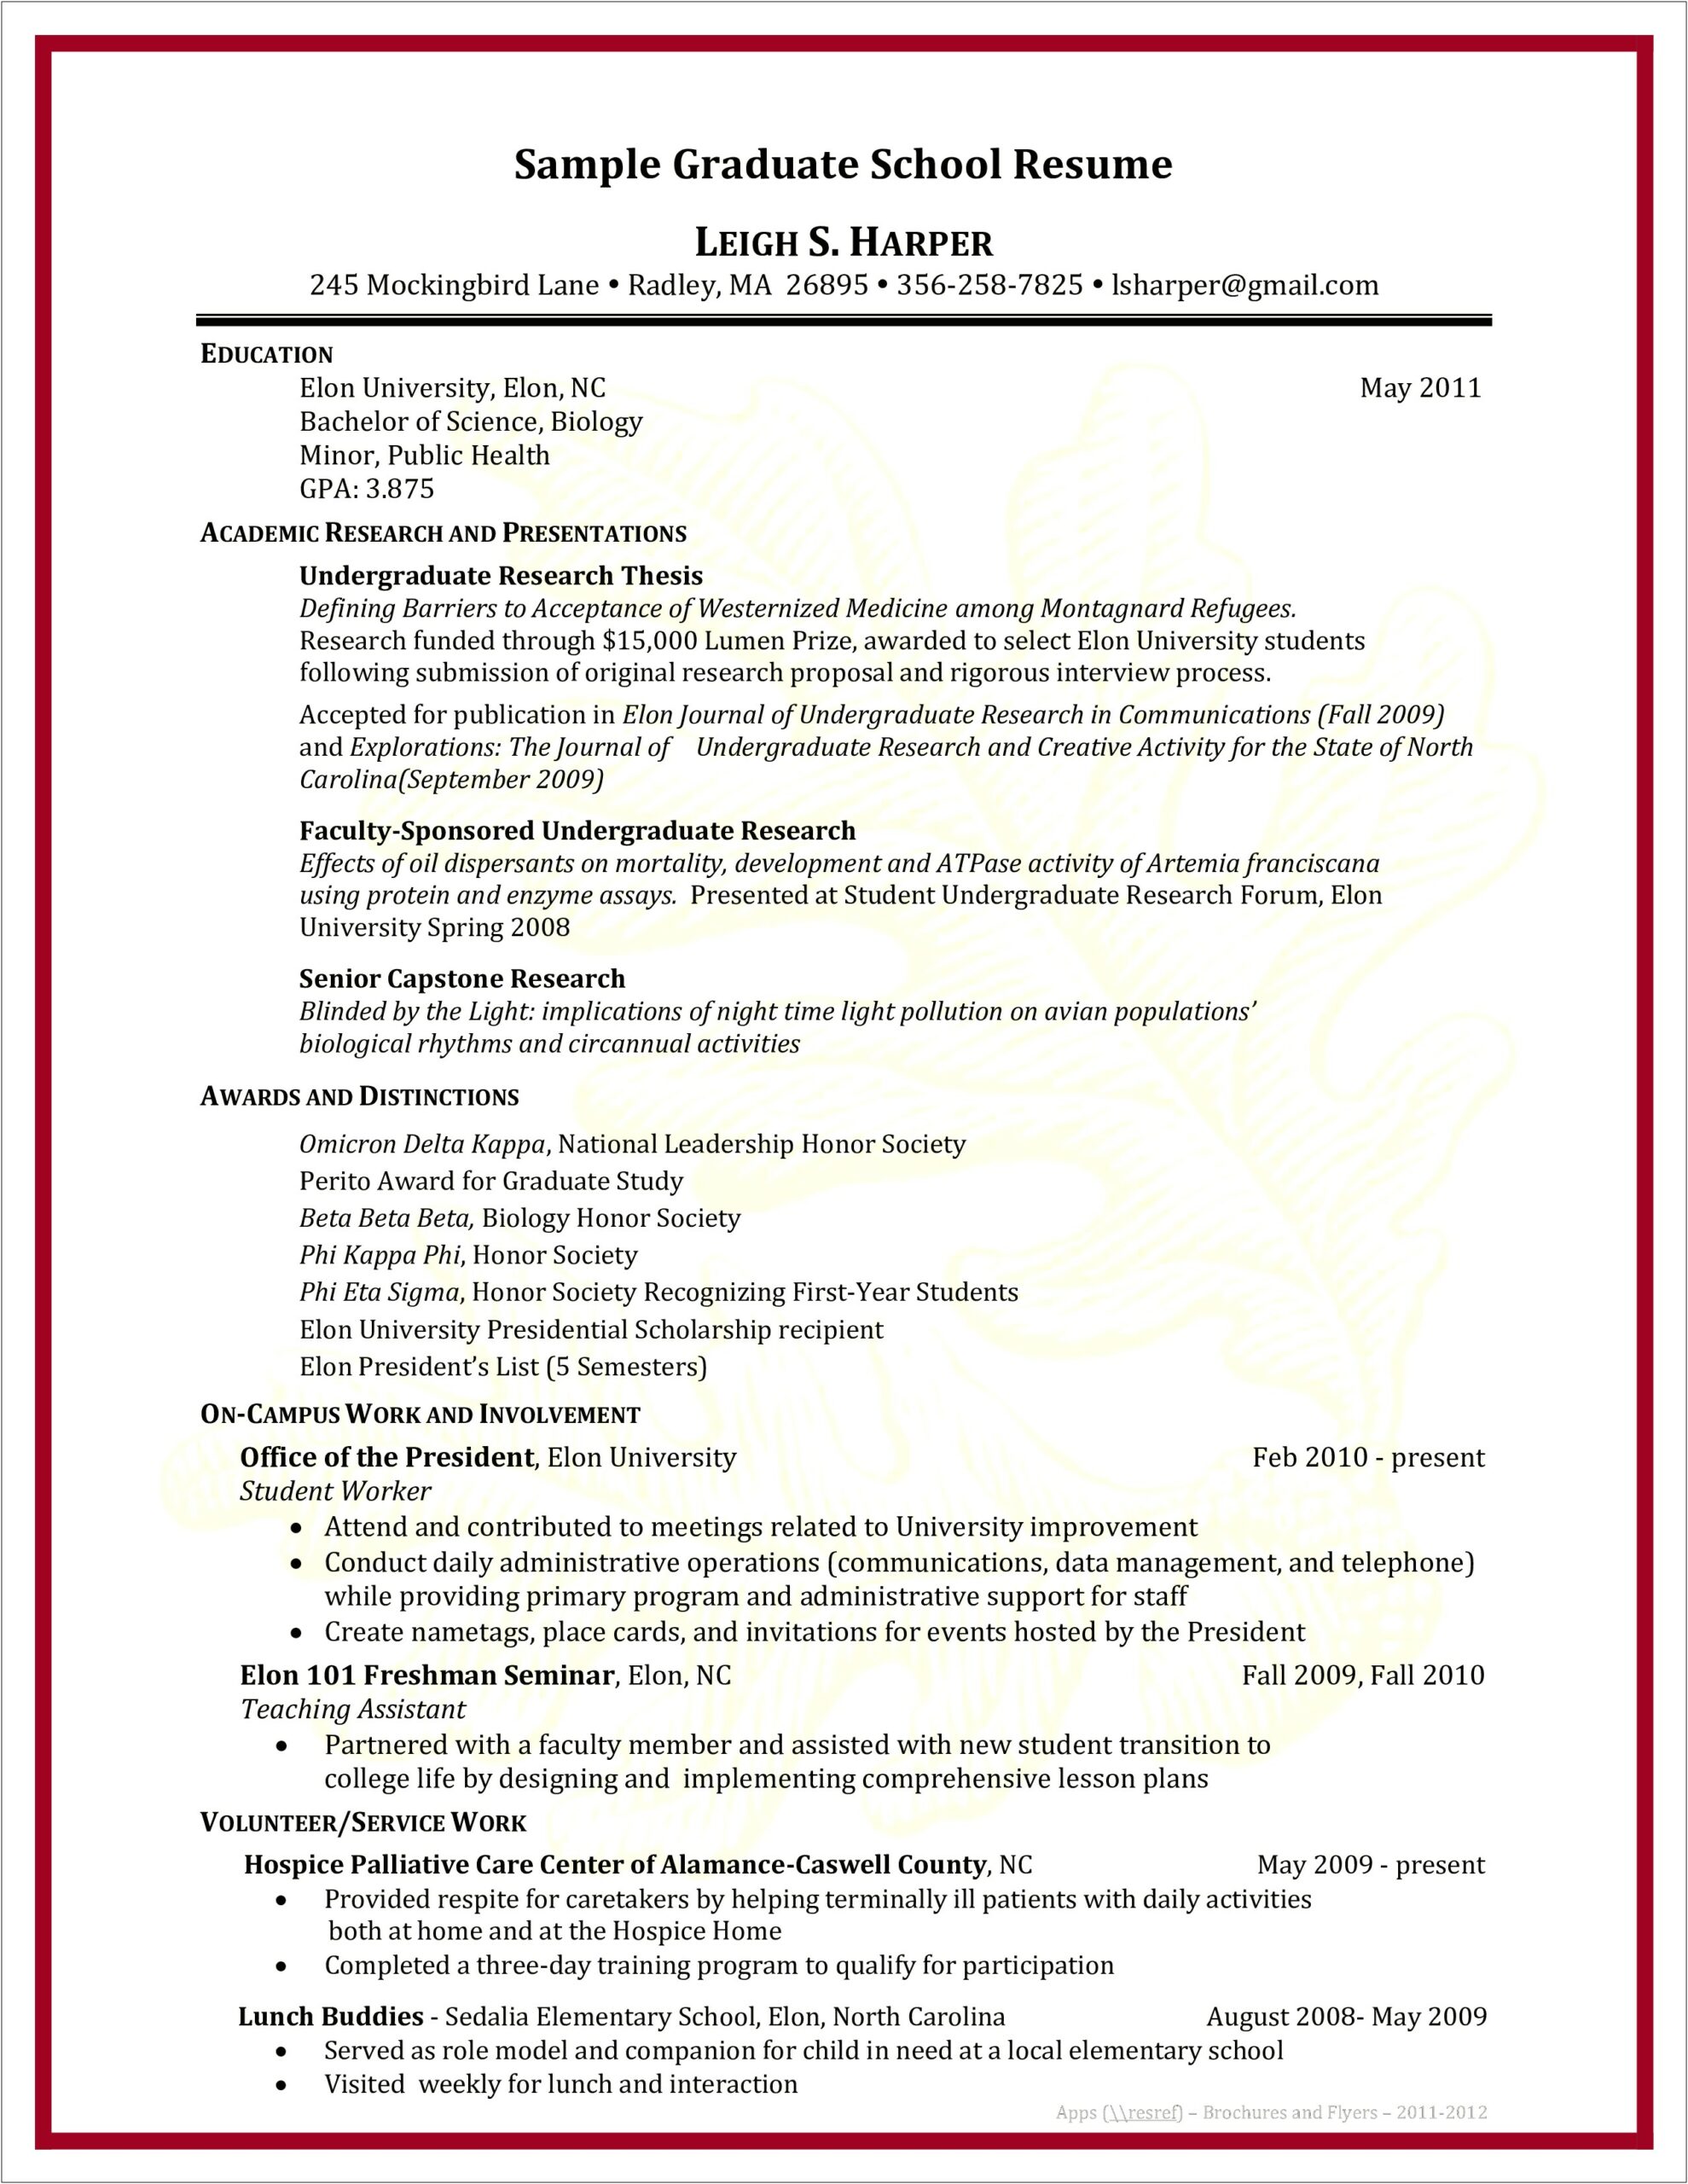 Do You Need A Resume For Graduate School